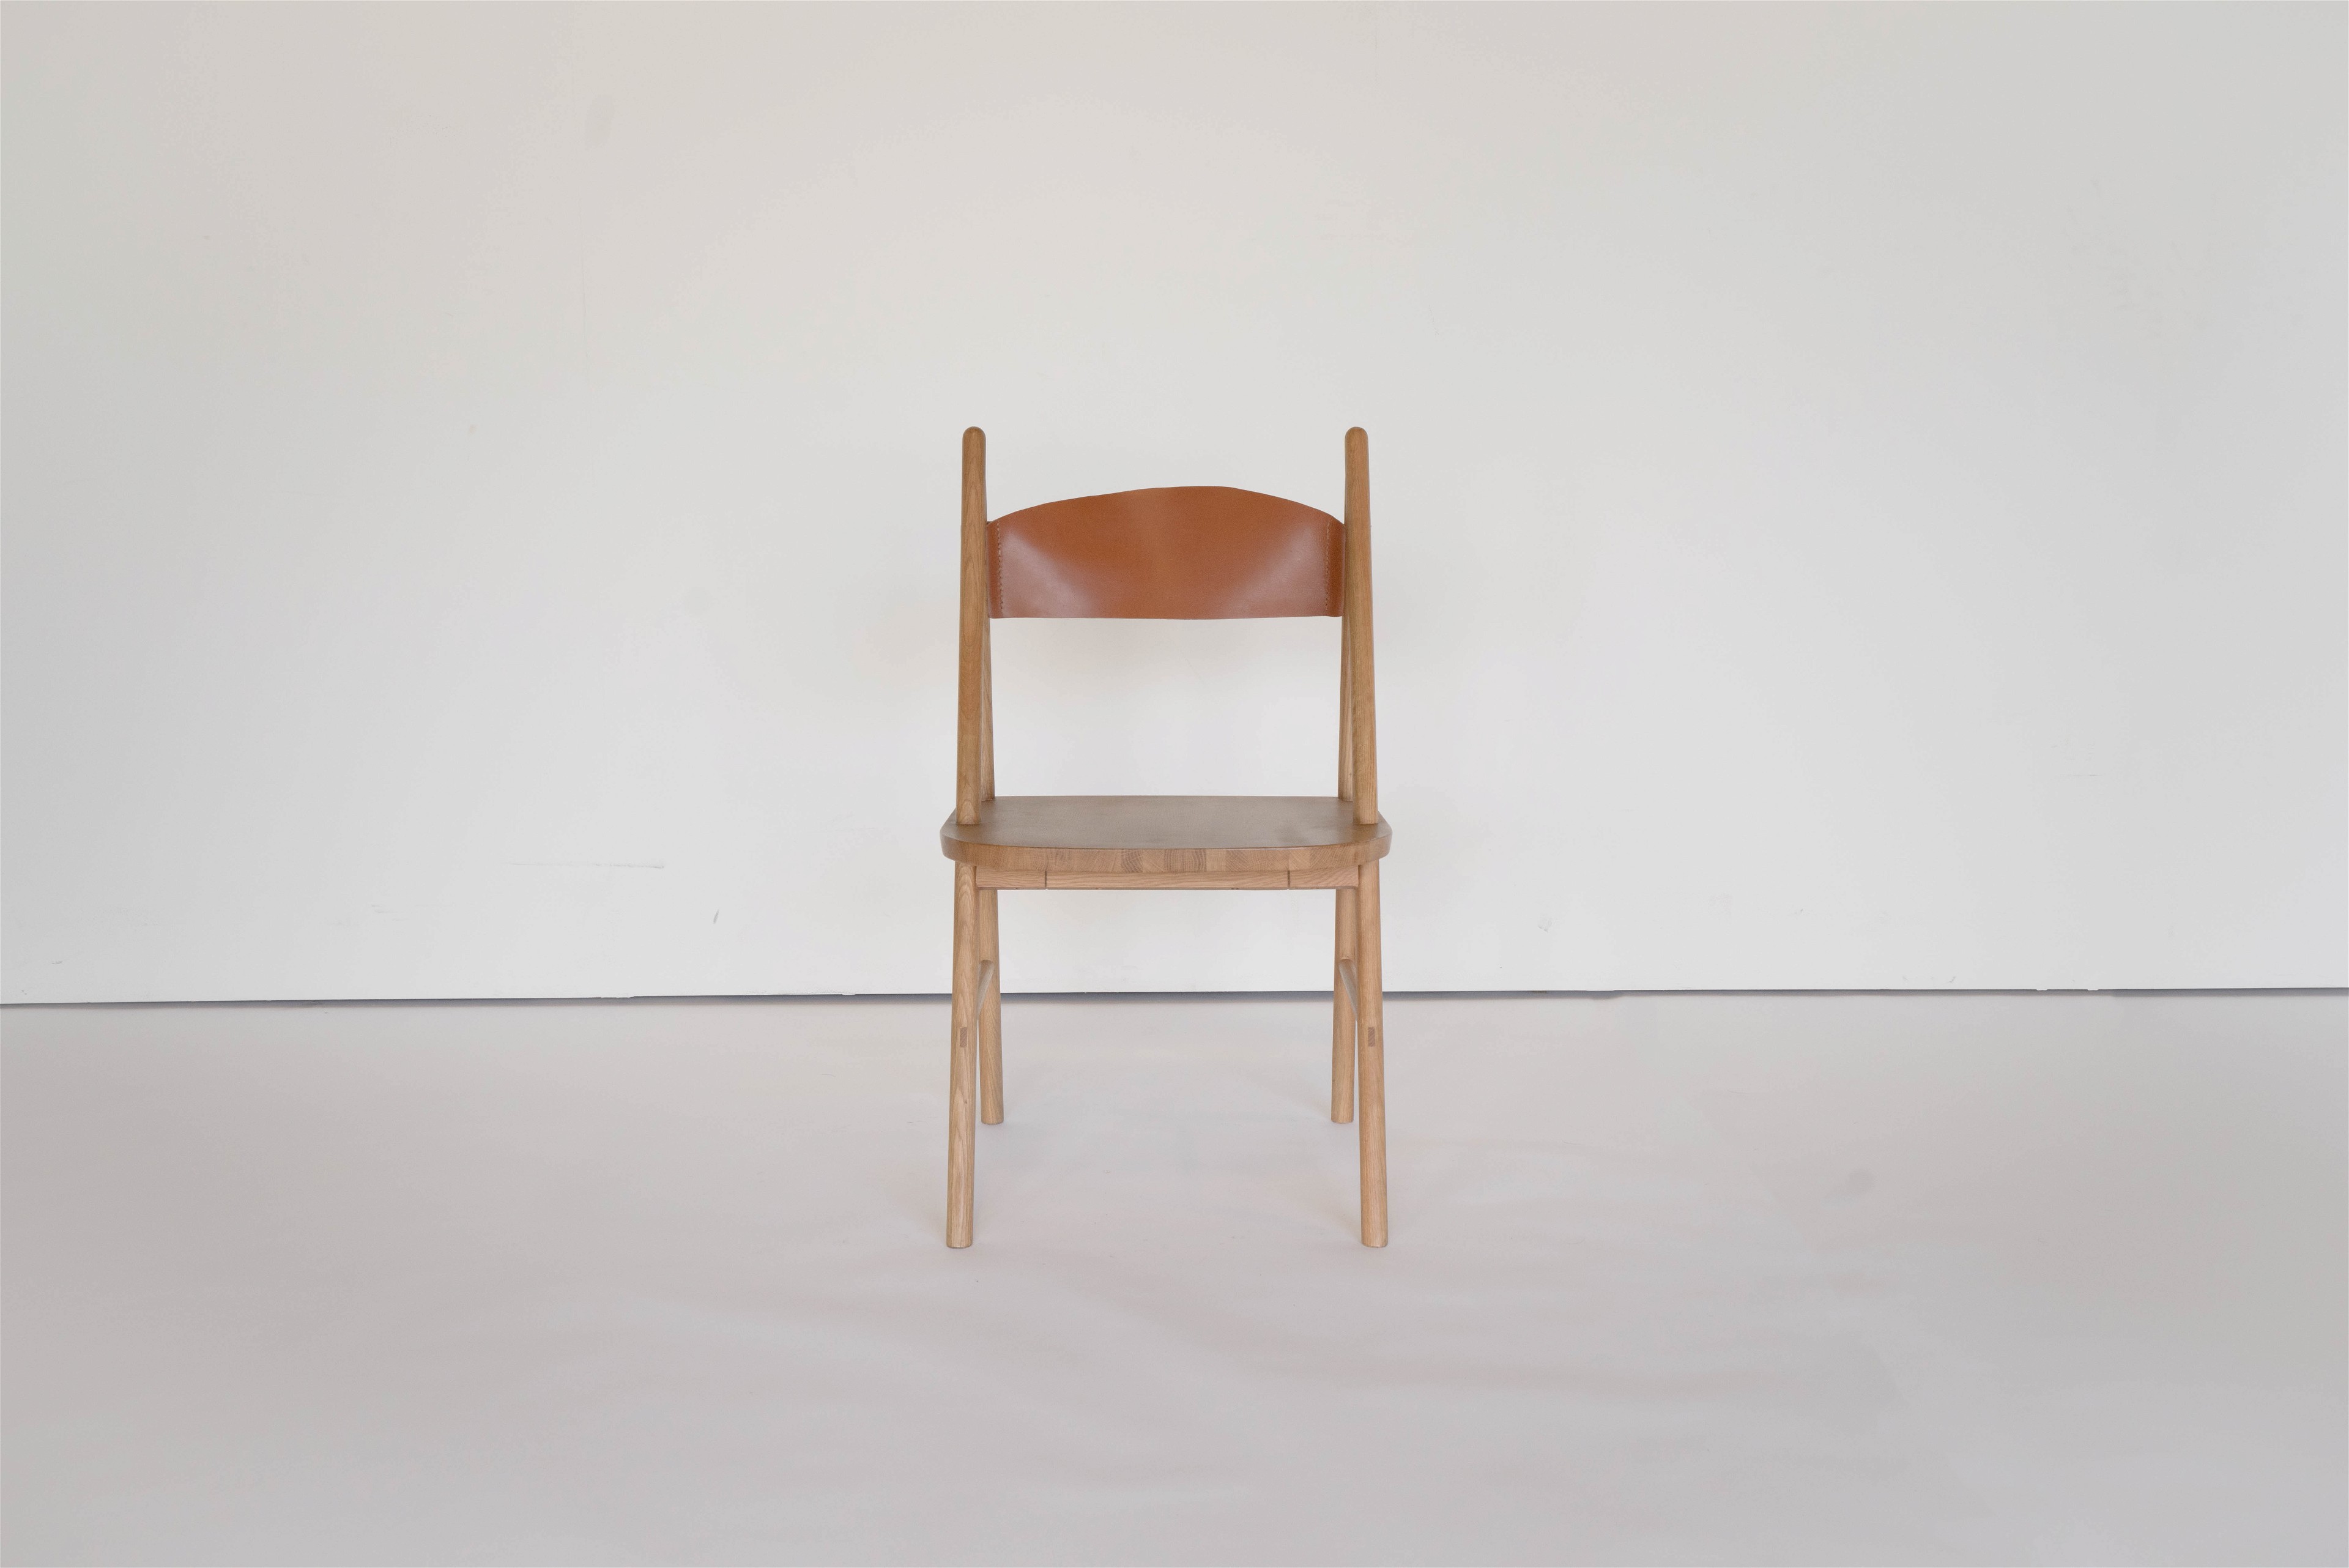 a wooden chair with a brown leather seat